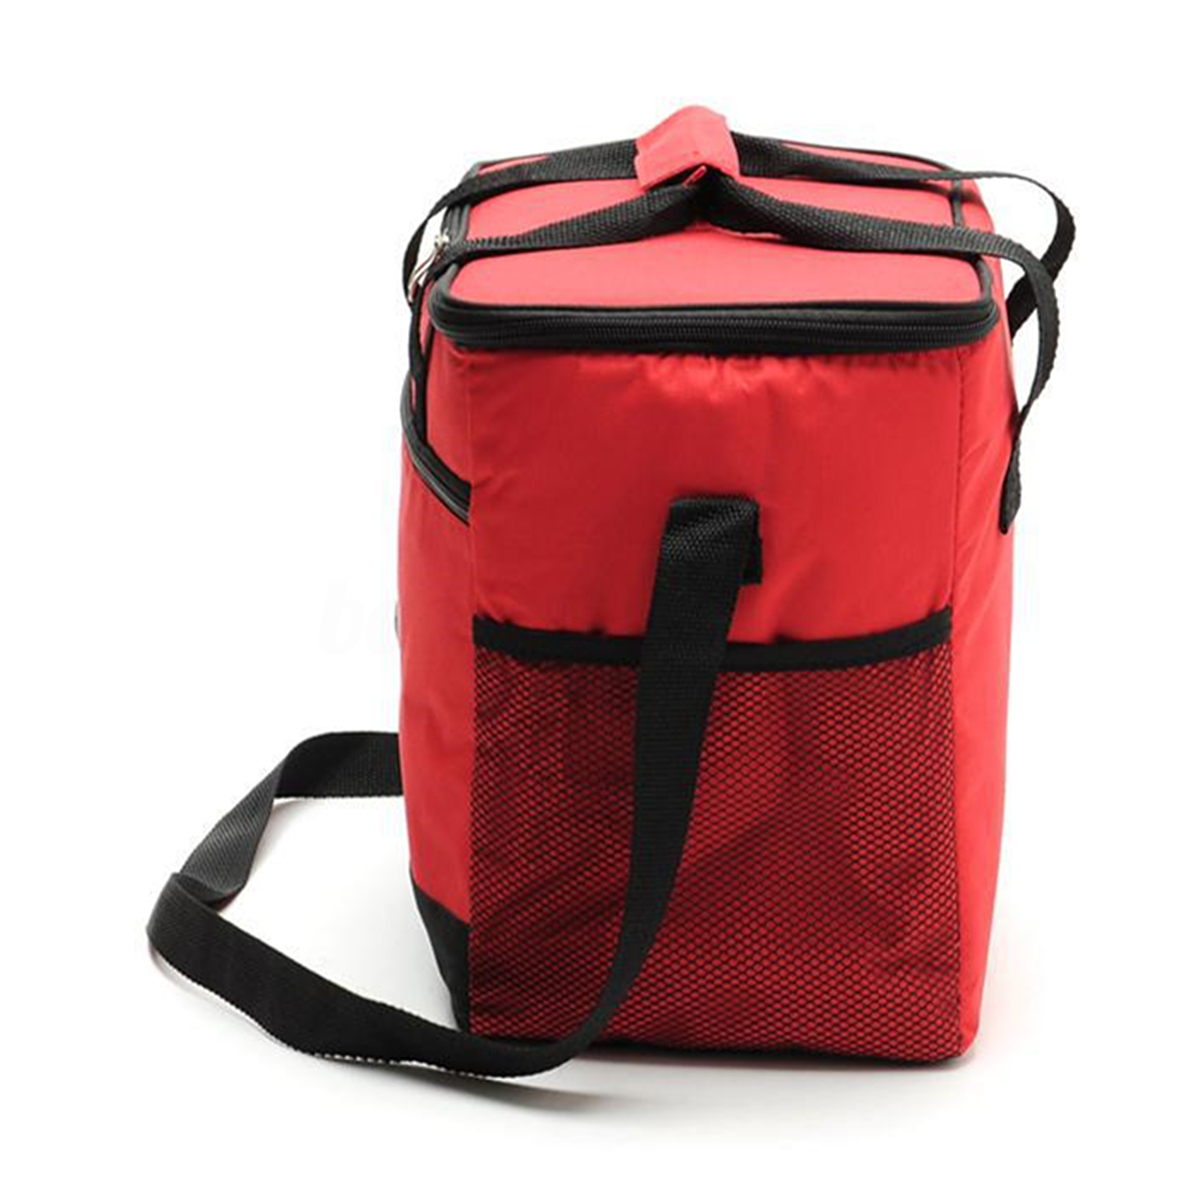 Large-Insulated-Cooler-Cool-Bag-Outdoor-Camping-Picnic-Lunch-Shoulder-Hand-Bag-1186956-6